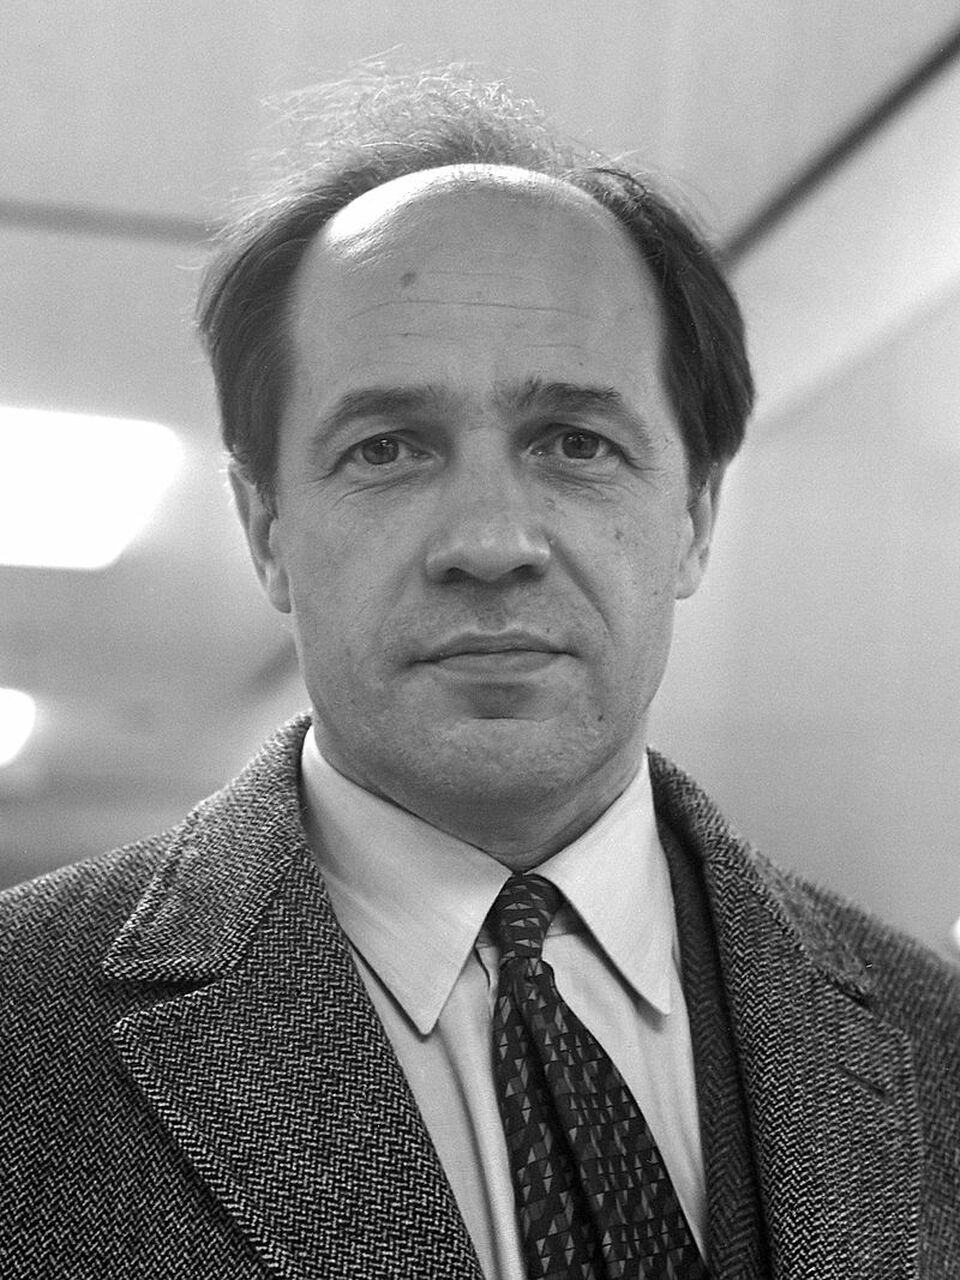 French composer Pierre Boulez in 1968. (Photo courtesy of Nationaal Archief/Joost Evers/Anefo)